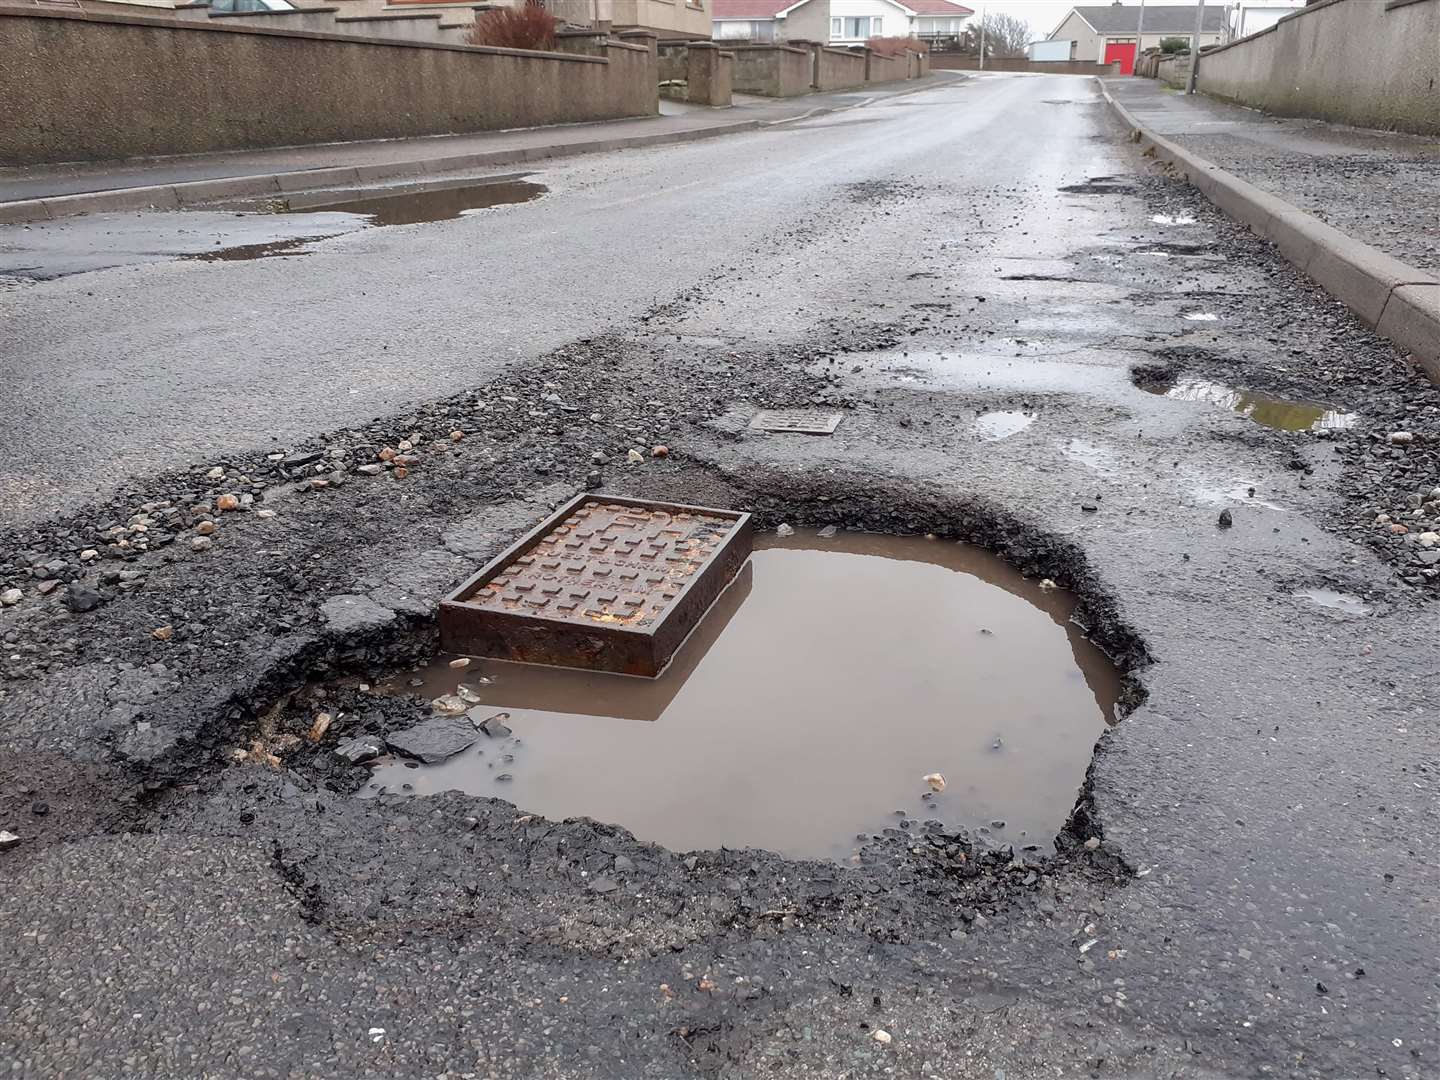 The public largely want to see investment to repair roads like this one in Wick.